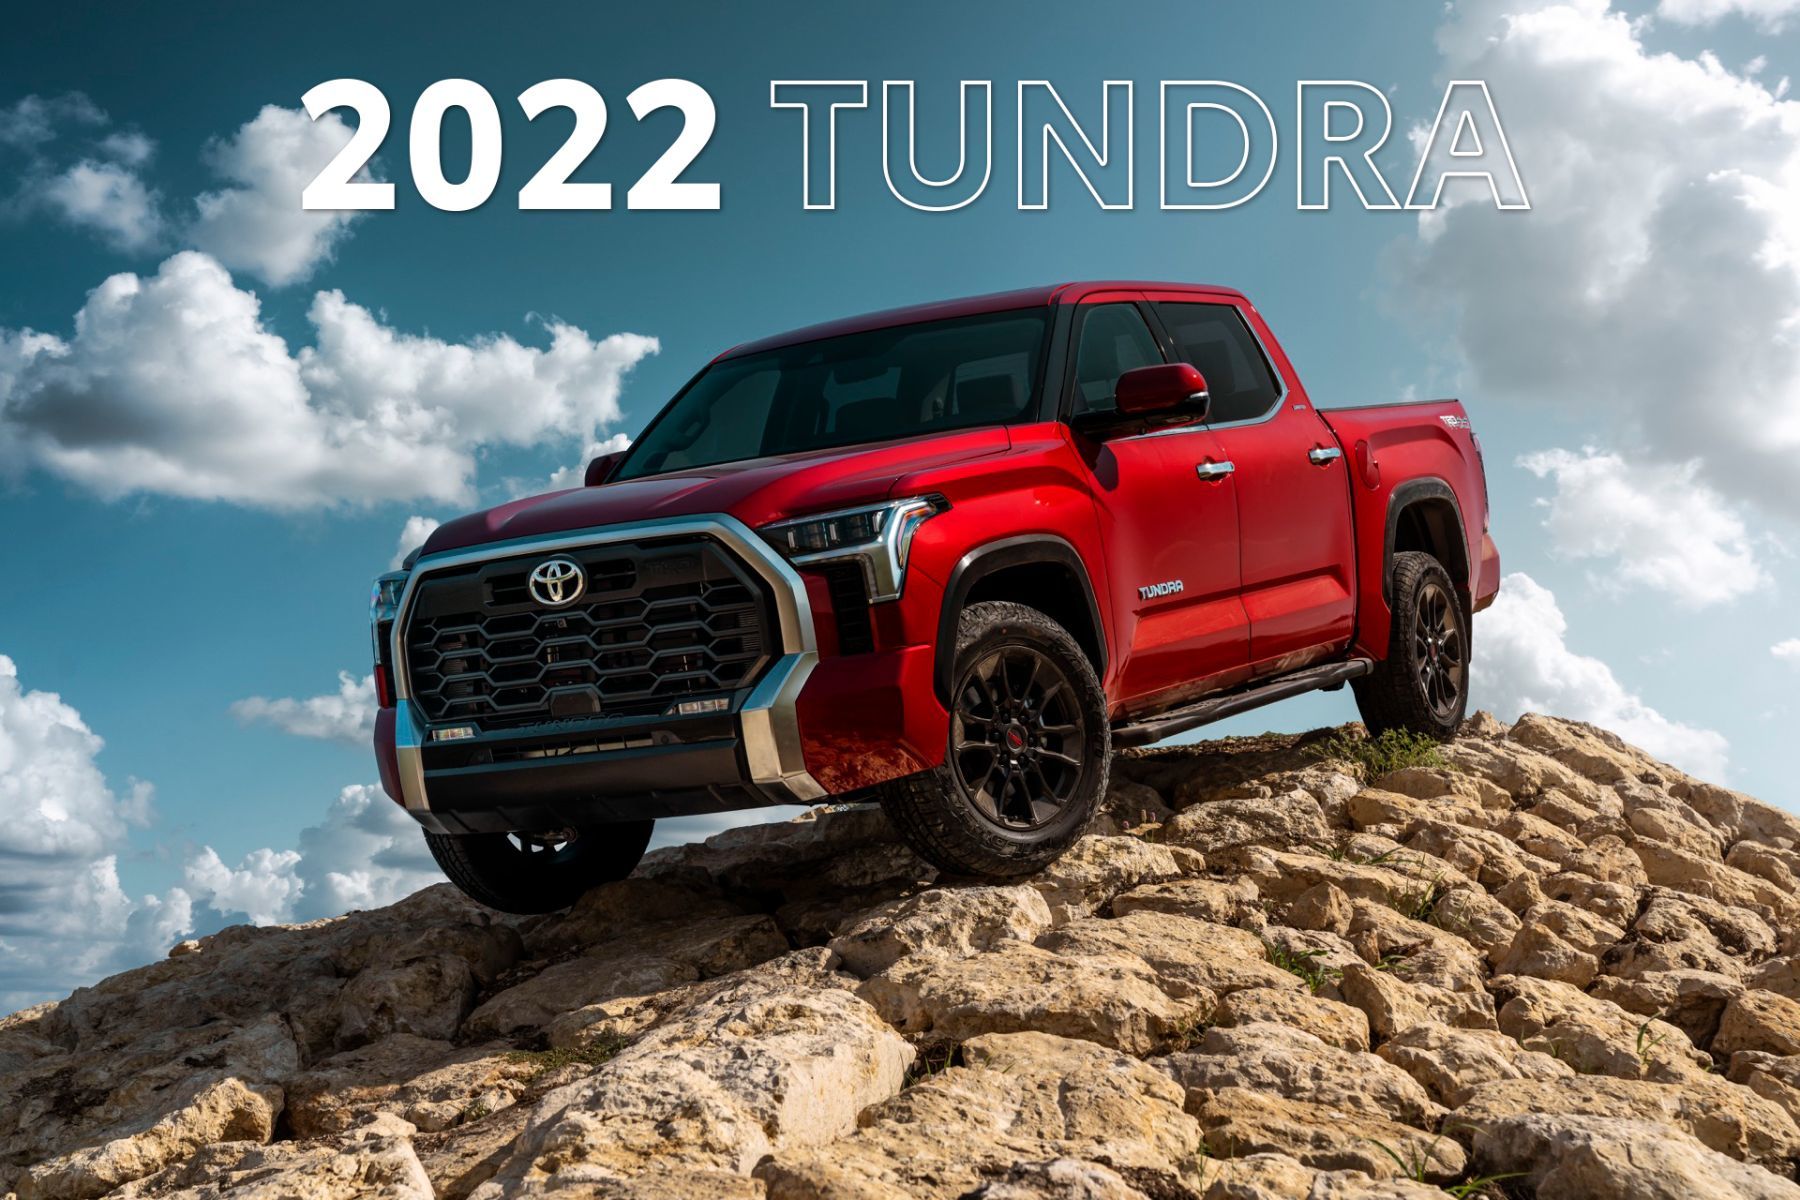 What are the differences in the 2022 Tundra Models?